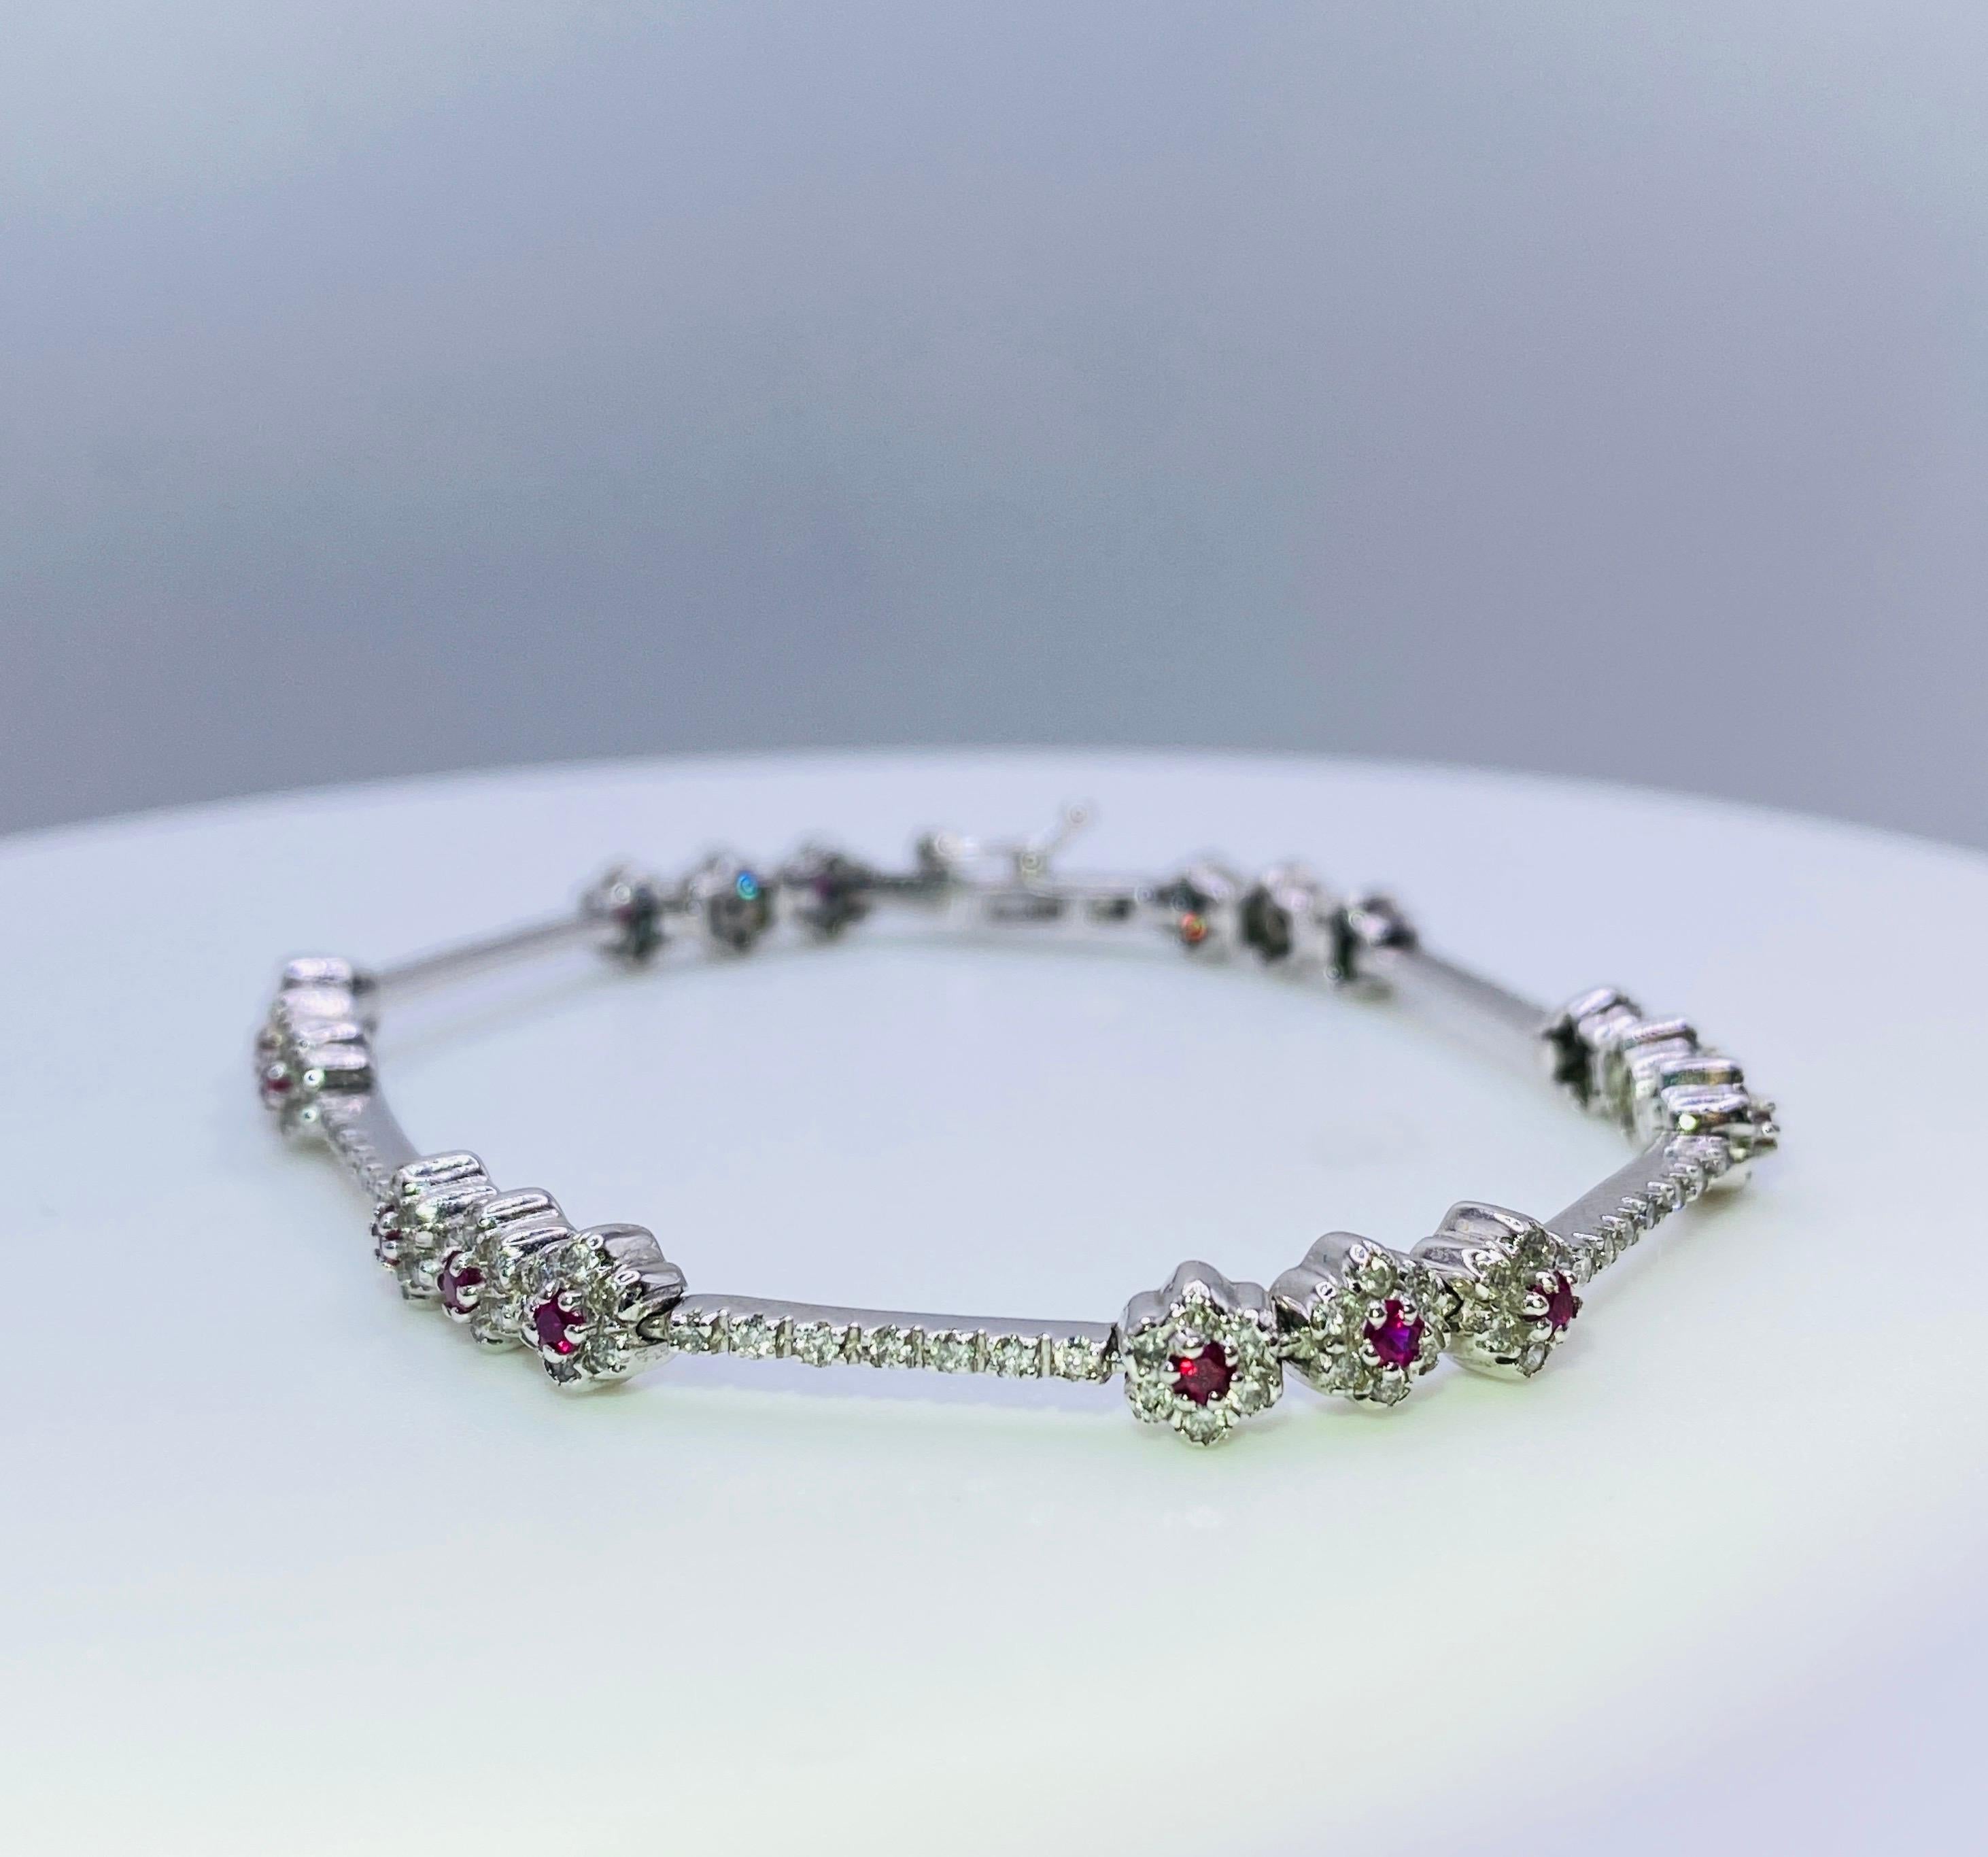 14K white gold flower line bracelet with 18=0.80 carat total weight round brilliant rubies and 150=1.68 carat total weight round brilliant diamonds. Length 7”